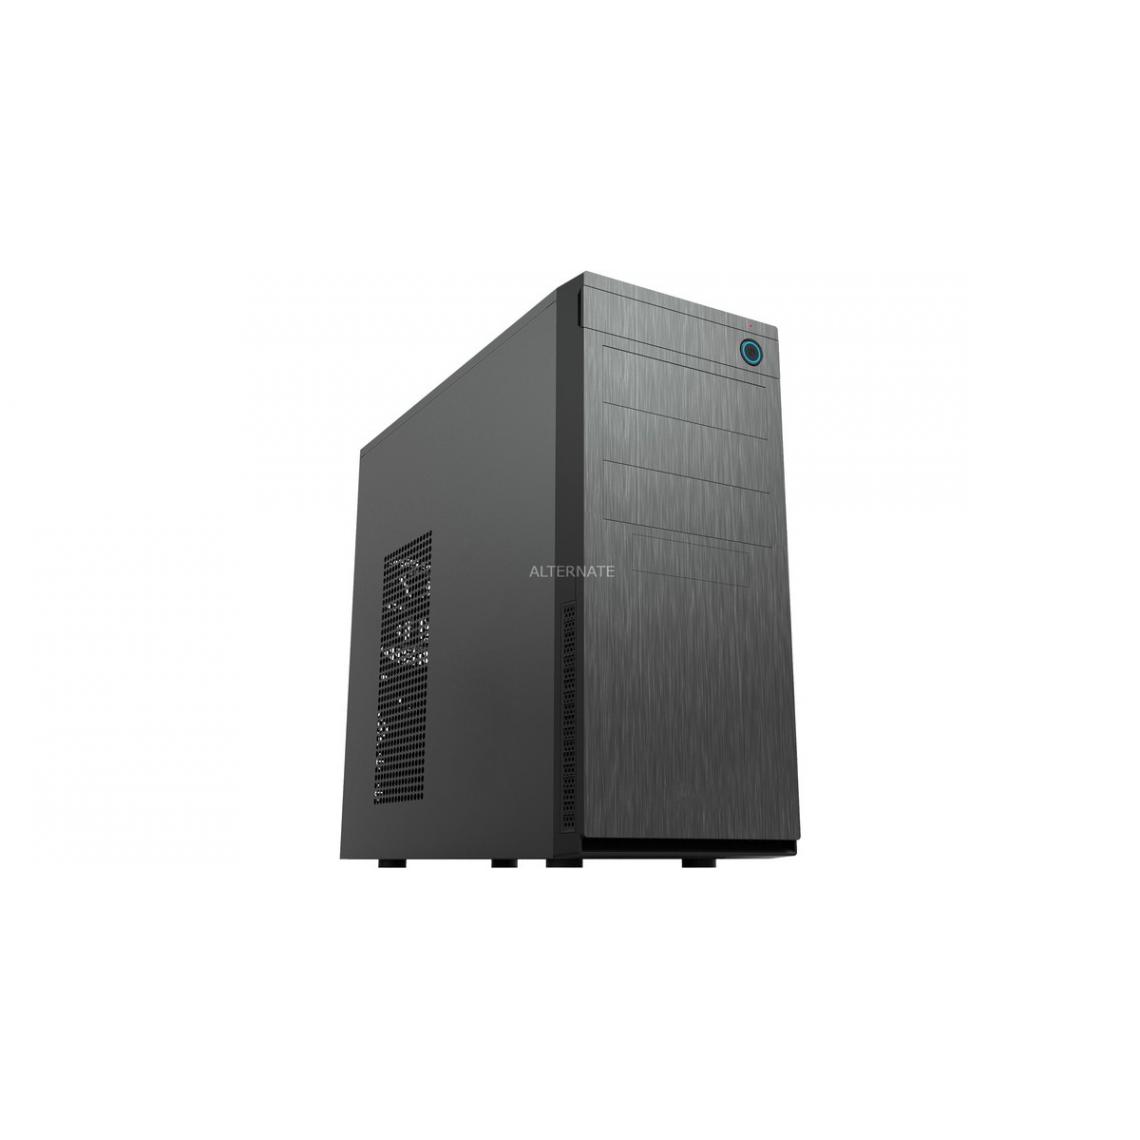 Chieftec - ATX tower SPCC 0.6mm ATX tower SPCC 0.6mm without PSU. with 1xUSB type-C 480Mbit/s 2xUSB 3.0 2xUSB 2.0 Mic-in Audio-out bays - Boitier PC